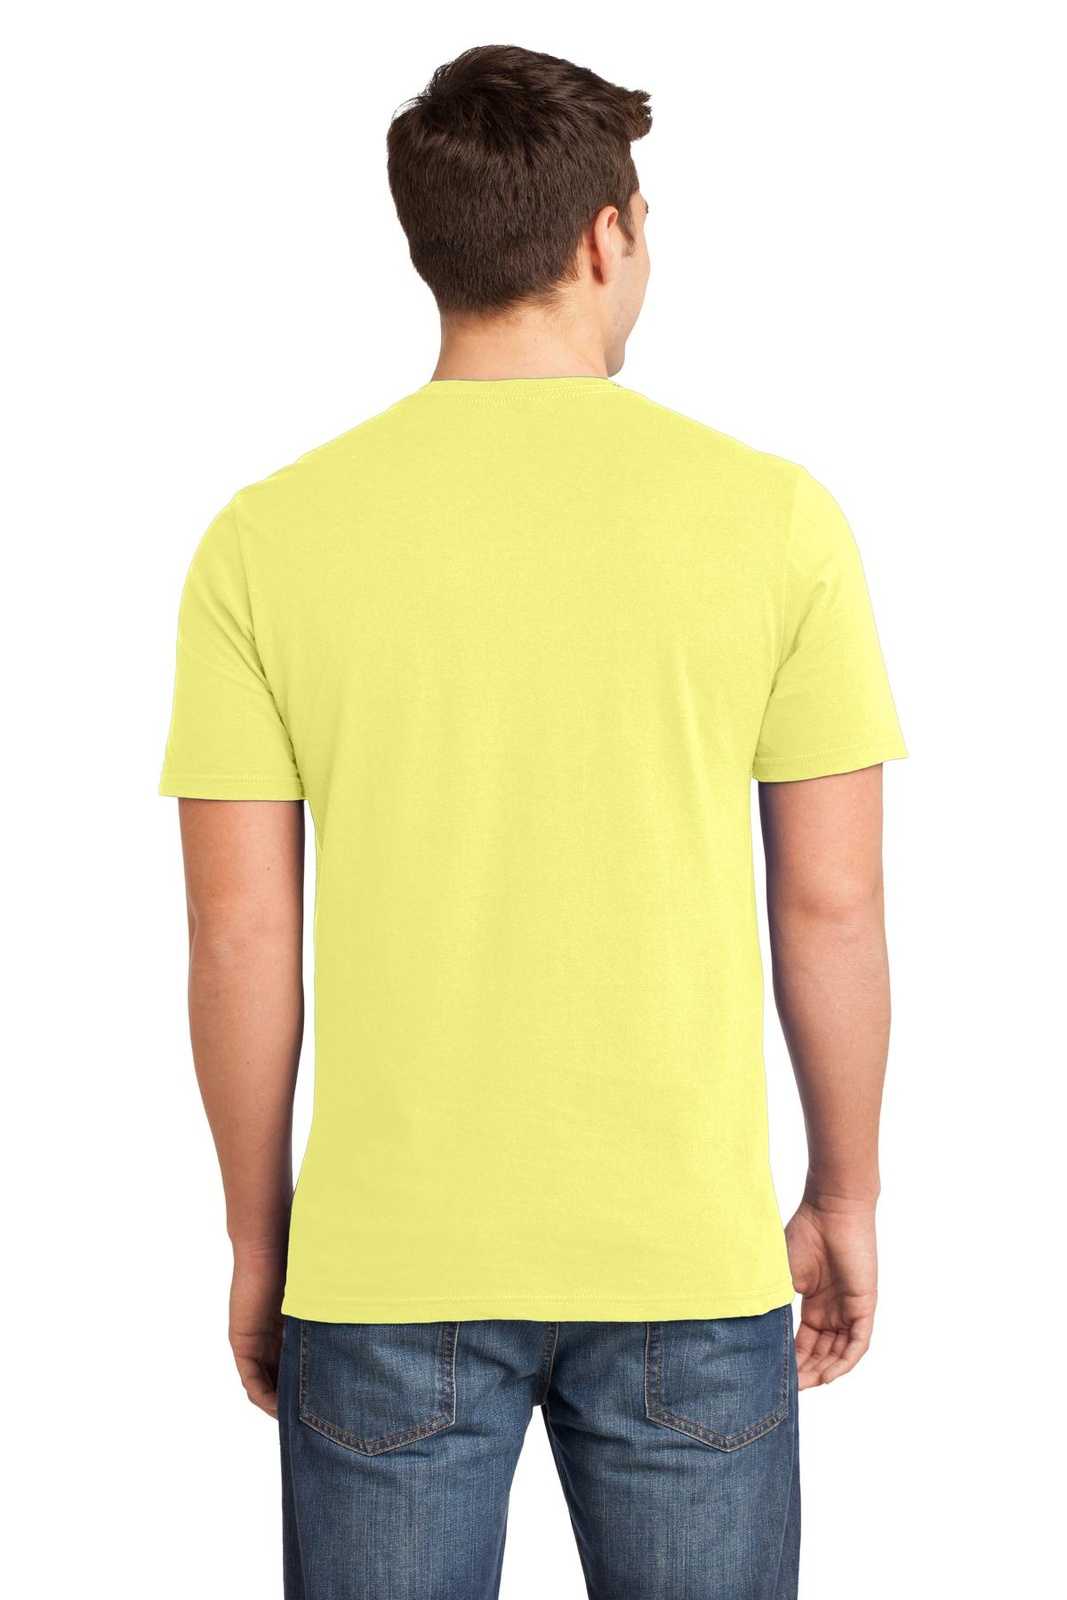 District DT6000 Very Important Tee - Lemon Yellow - HIT a Double - 1